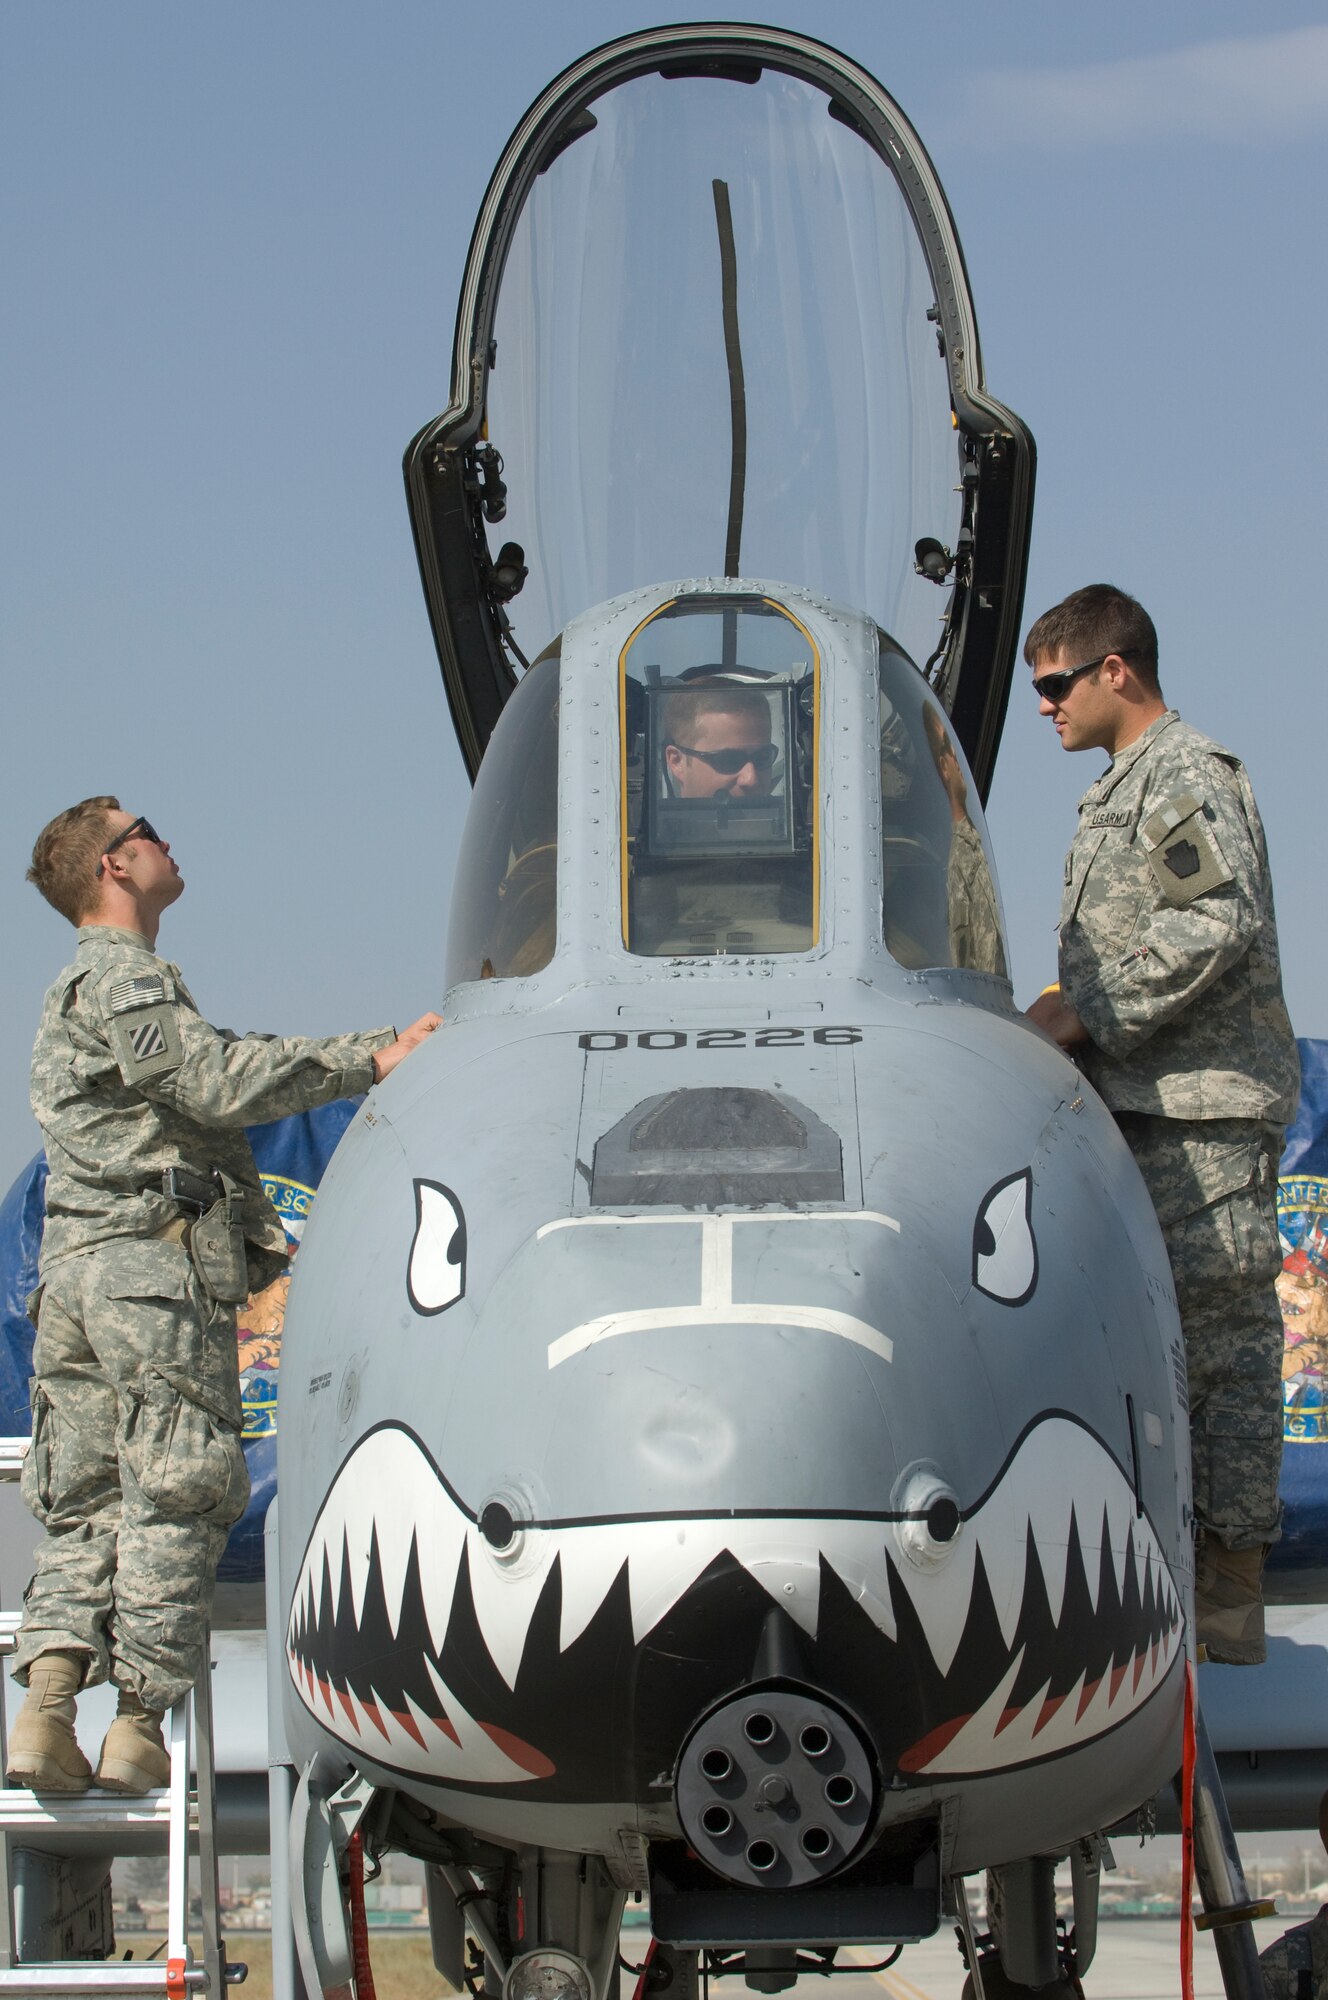 BAGRAM AIR FIELD, Afghanistan -- Pennsylvania Army National Guard Soldiers Sgt. Mervin Hengst (left) and Staff Sgt. Donald Zerbe (right) learn about the A-10 Thunderbolt II from Capt. Robert Burdette during a recent visit to Bagram Air Field's fighter squadrons. Members from the F-15E 391st Expeditionary Fighter Squadron and A-10 75th Expeditionary Fighter Squadron hosted the visit after the Soldiers had expressed a desire to personally thank pilots who provide close-air support for troops on the ground while engaged in fire fights with enemy forces. (U.S. Air Force photo/Master Sgt. Keith Brown)